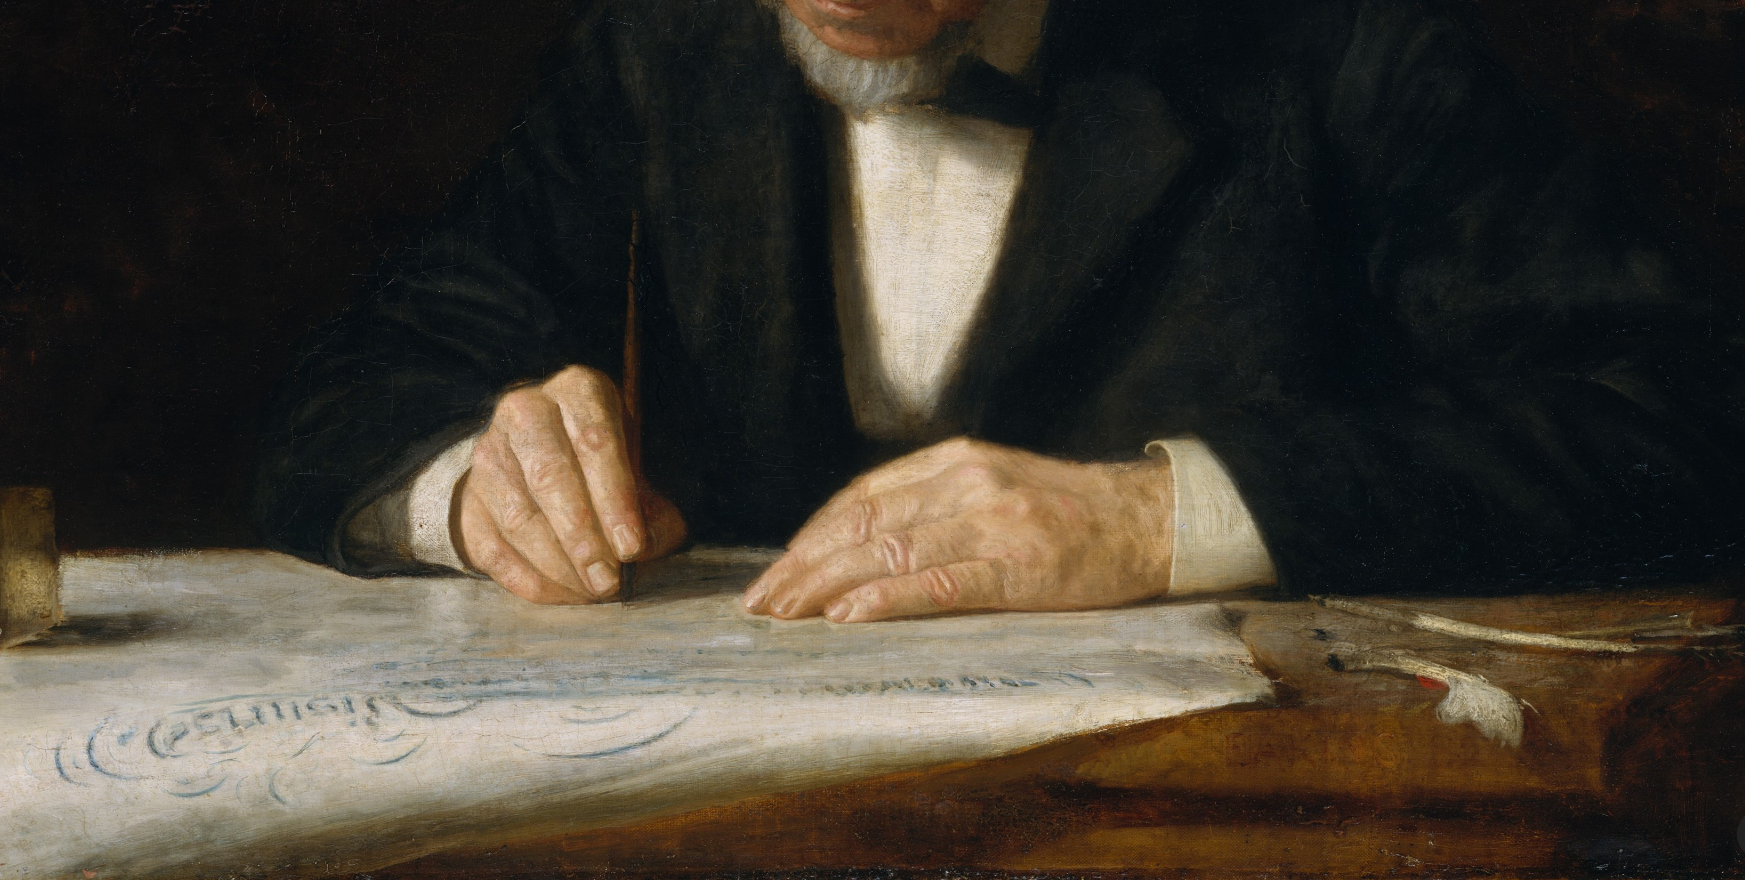 grips_cplt_1882_Eakins-Writing-Master.png